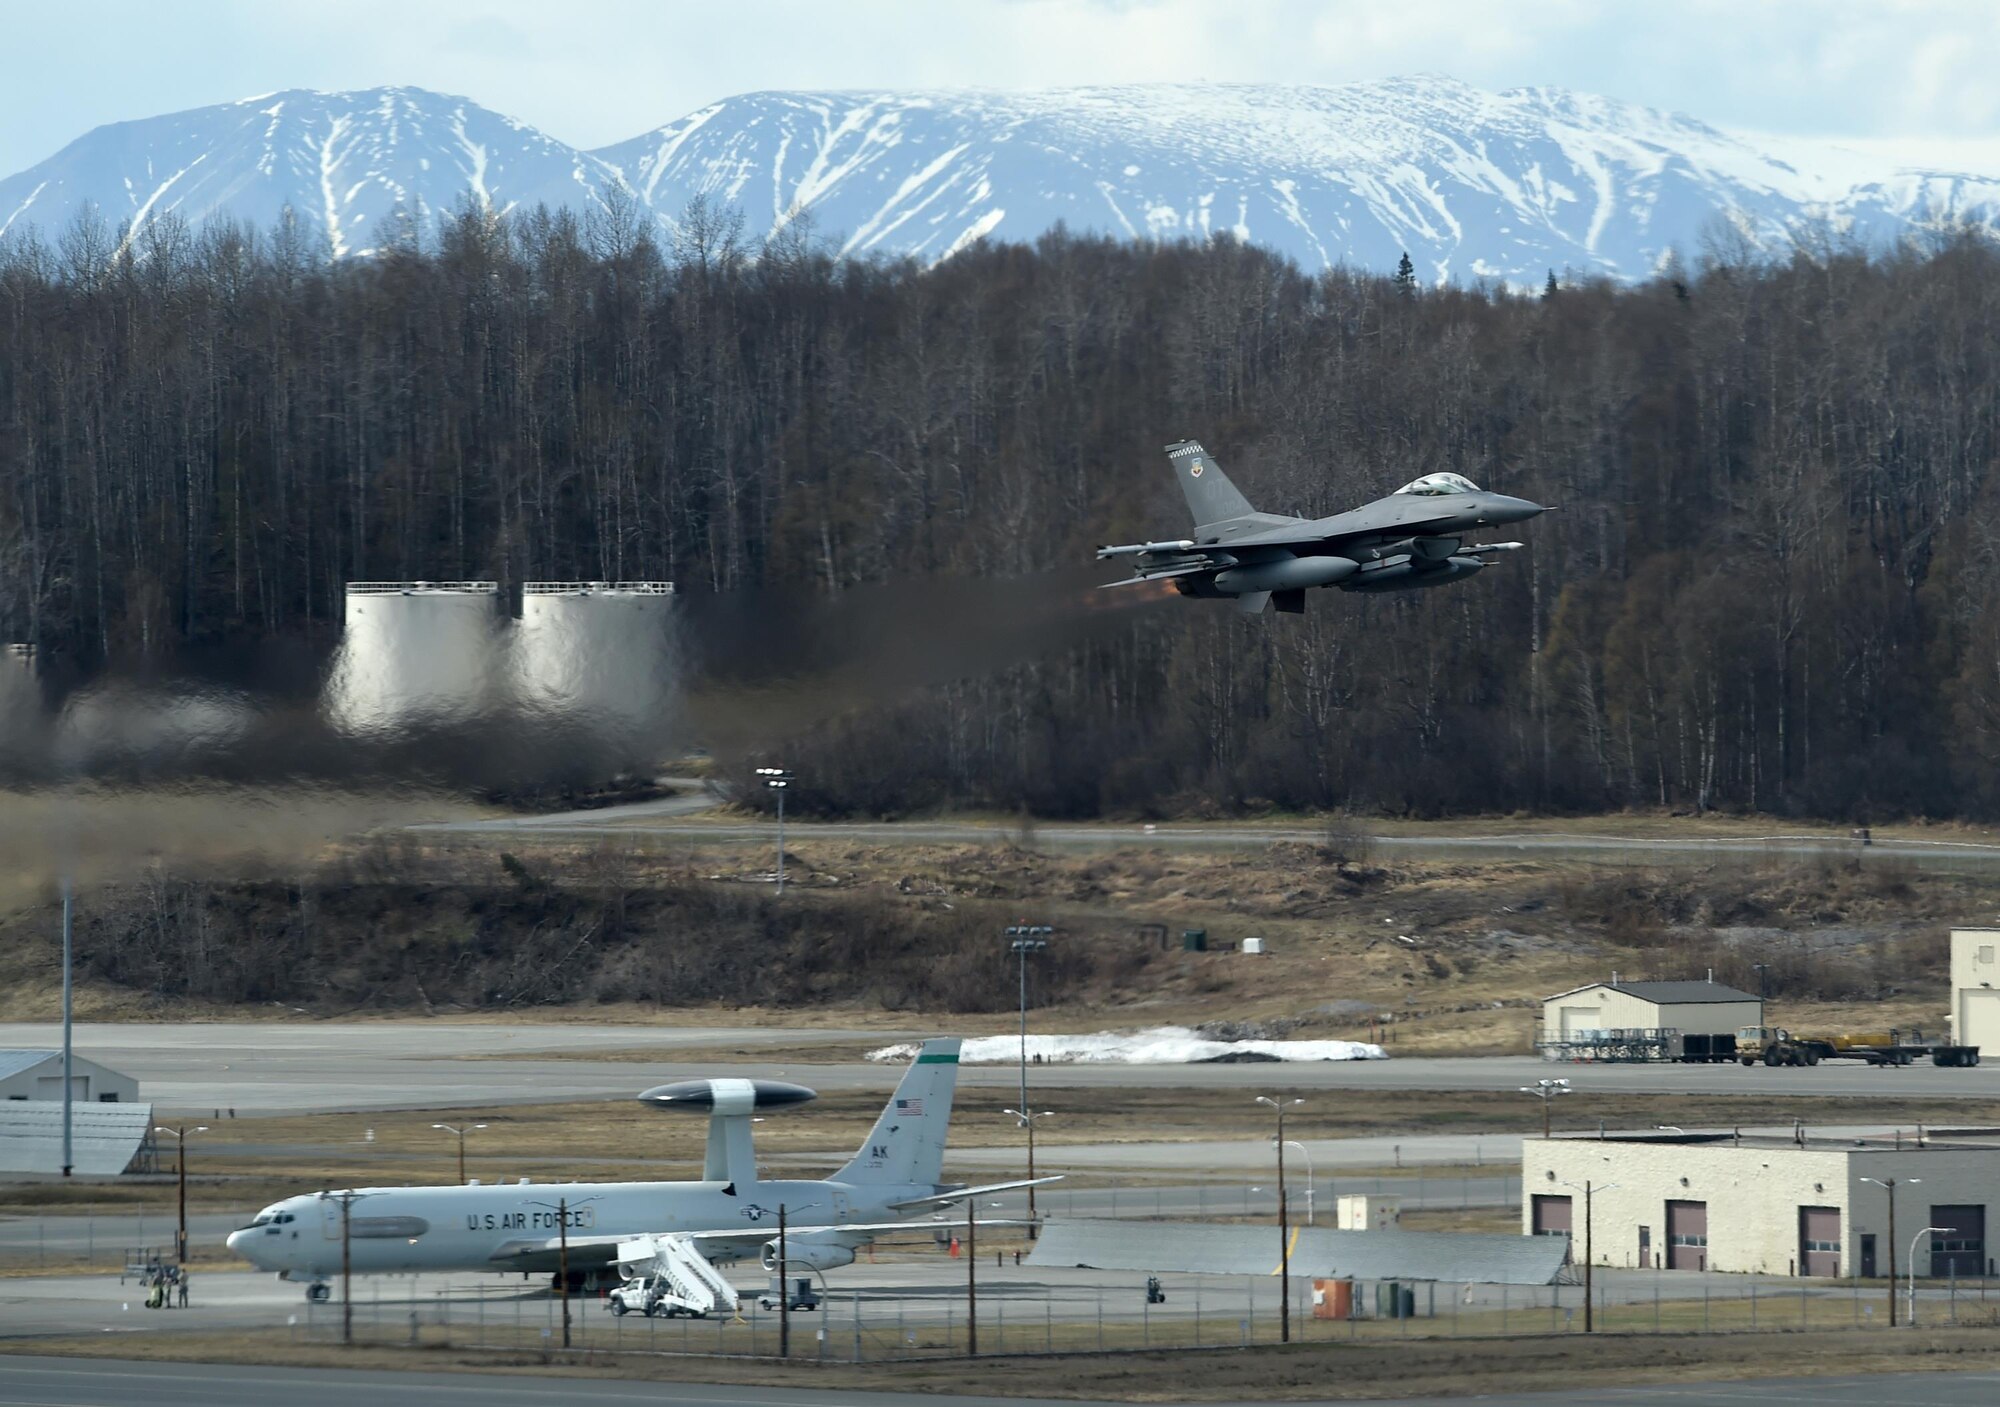 An F-16 Fighting Falcon from Eglin Air Force Base Fla., takes off at Joint Base Elmendorf-Richardson, Alaska, during exercise Northern Edge 17, May 3, 2017. Northern Edge is Alaska’s premier joint training exercise designed to practice operations, techniques and procedures as well as enhance interoperability among the services. Thousands of participants from all the services – Airmen, Soldiers, Sailors, Marines and Coast Guardsmen from active duty, Reserve and National Guard units – are involved. (U.S. Air Force photo by Airman 1st Class Javier Alvarez)